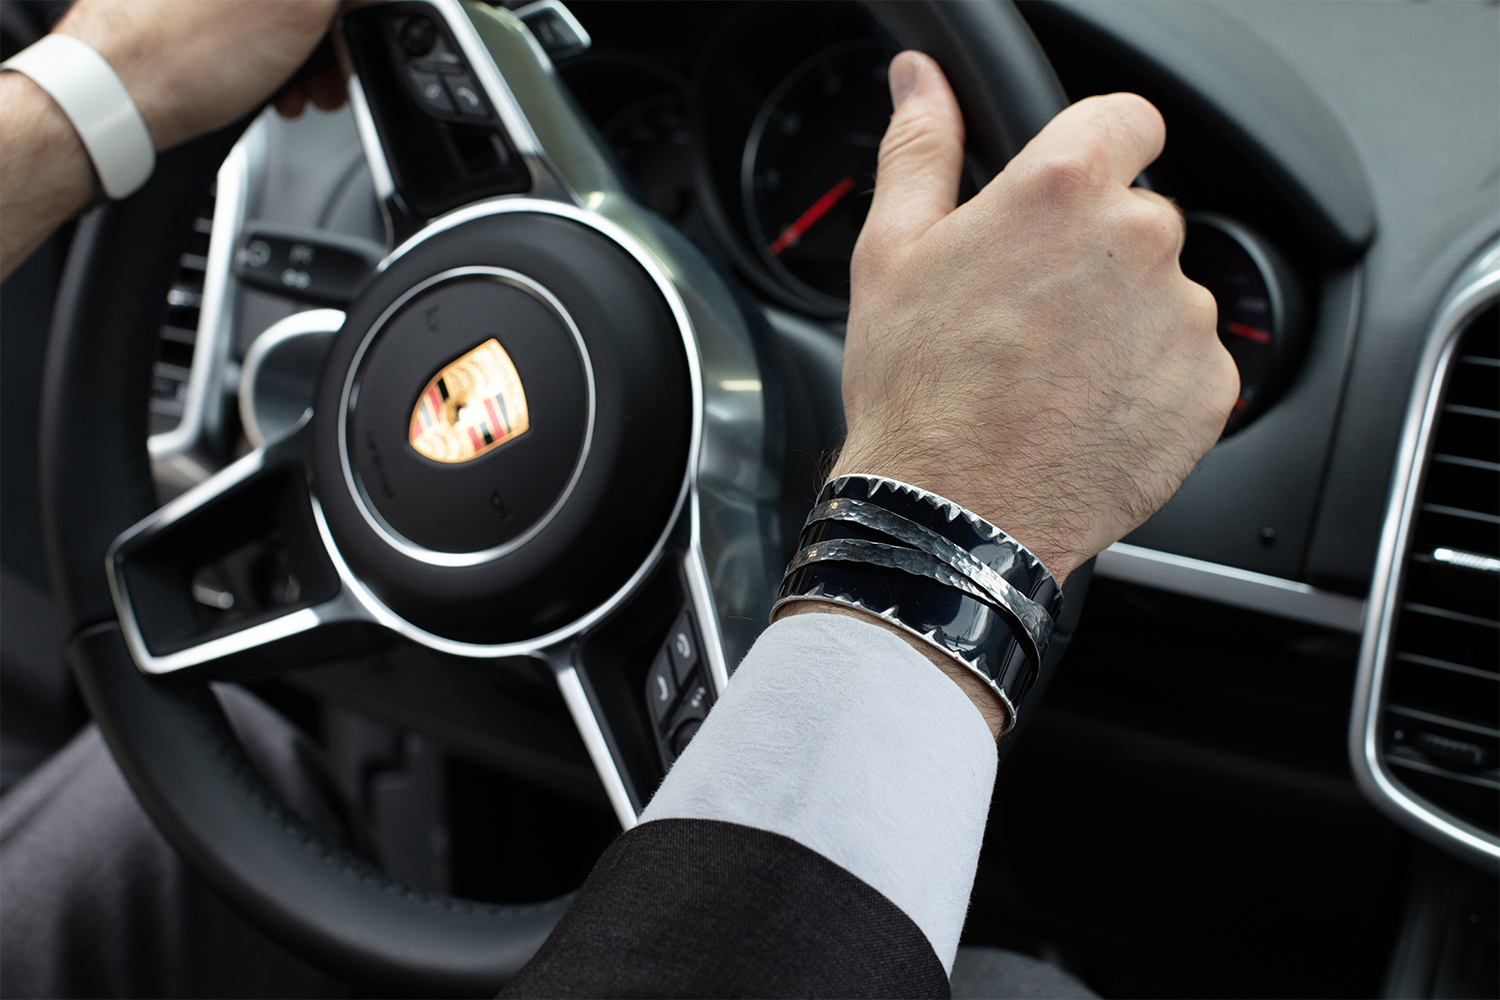 The Bentley Arnage Cuff by Crash Jewelry, seen here on a man's wrist, is made from the fender of a Bentley Arnage Limousine